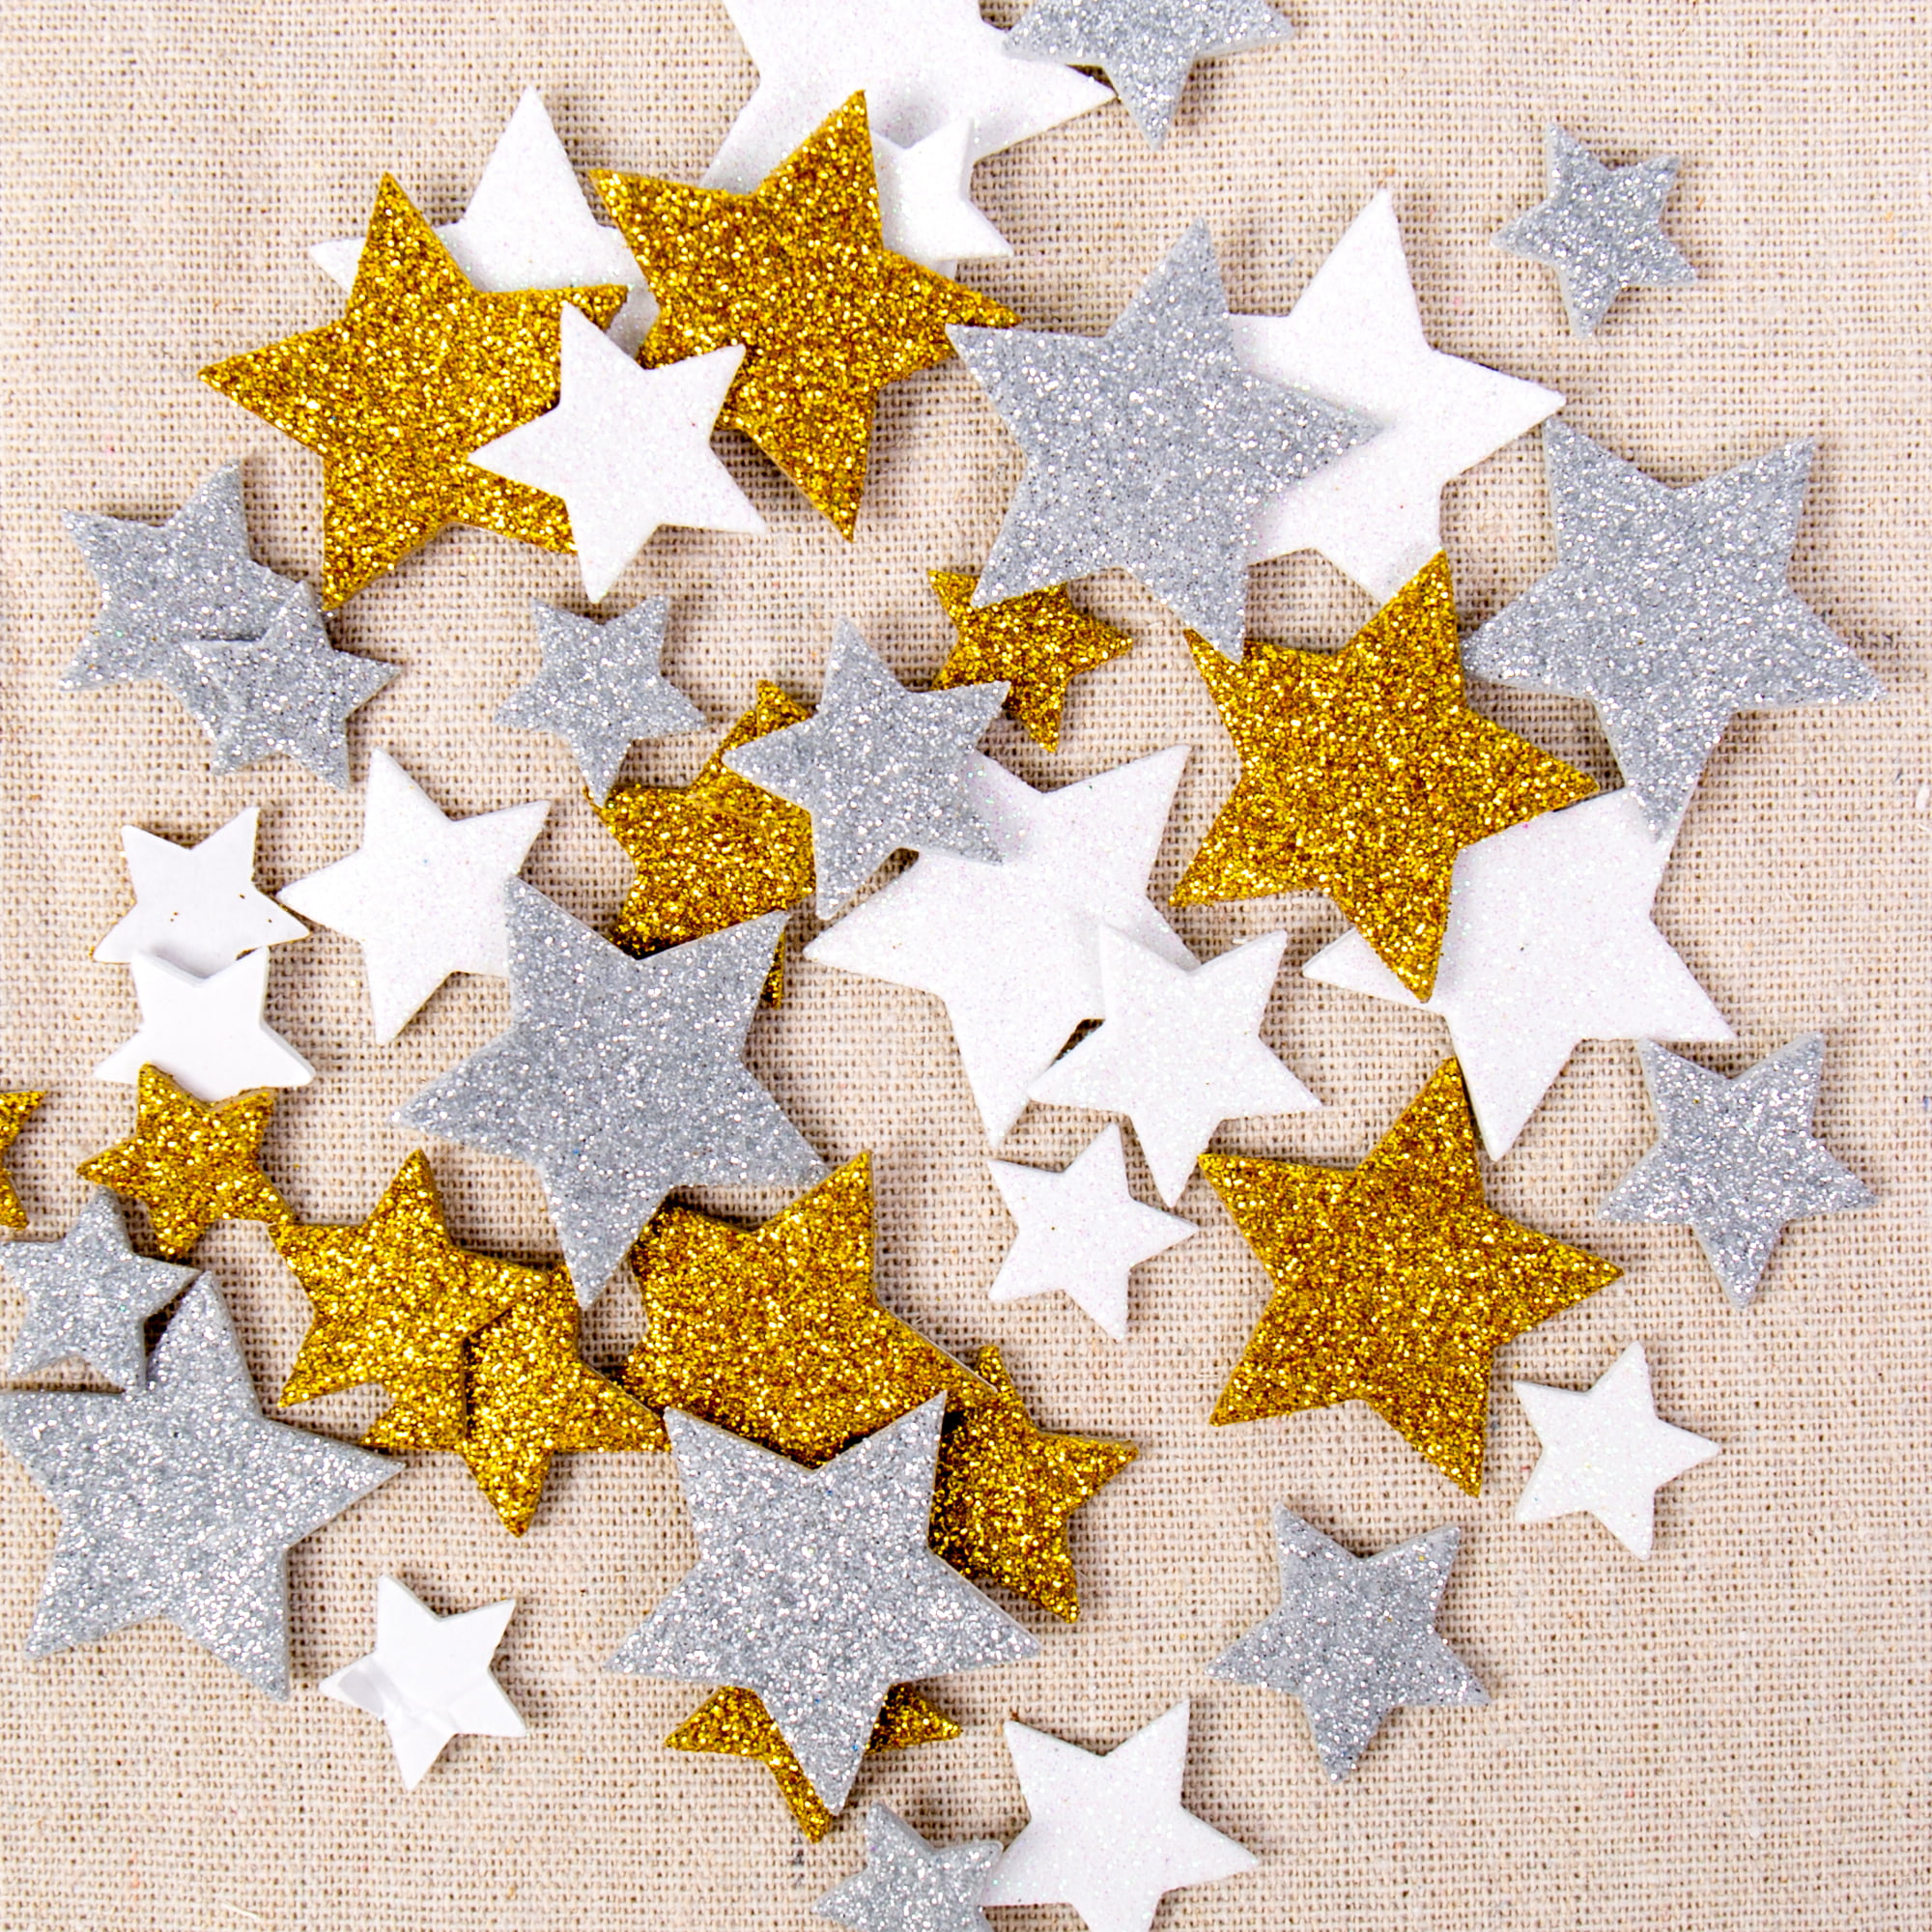 Baker Ross AV610 Gold & Silver Star Stickers - Pack of 150, Glitter Foam Self Adhesive Scrapbook Stickers, Great for Kids Arts and Crafts Activities